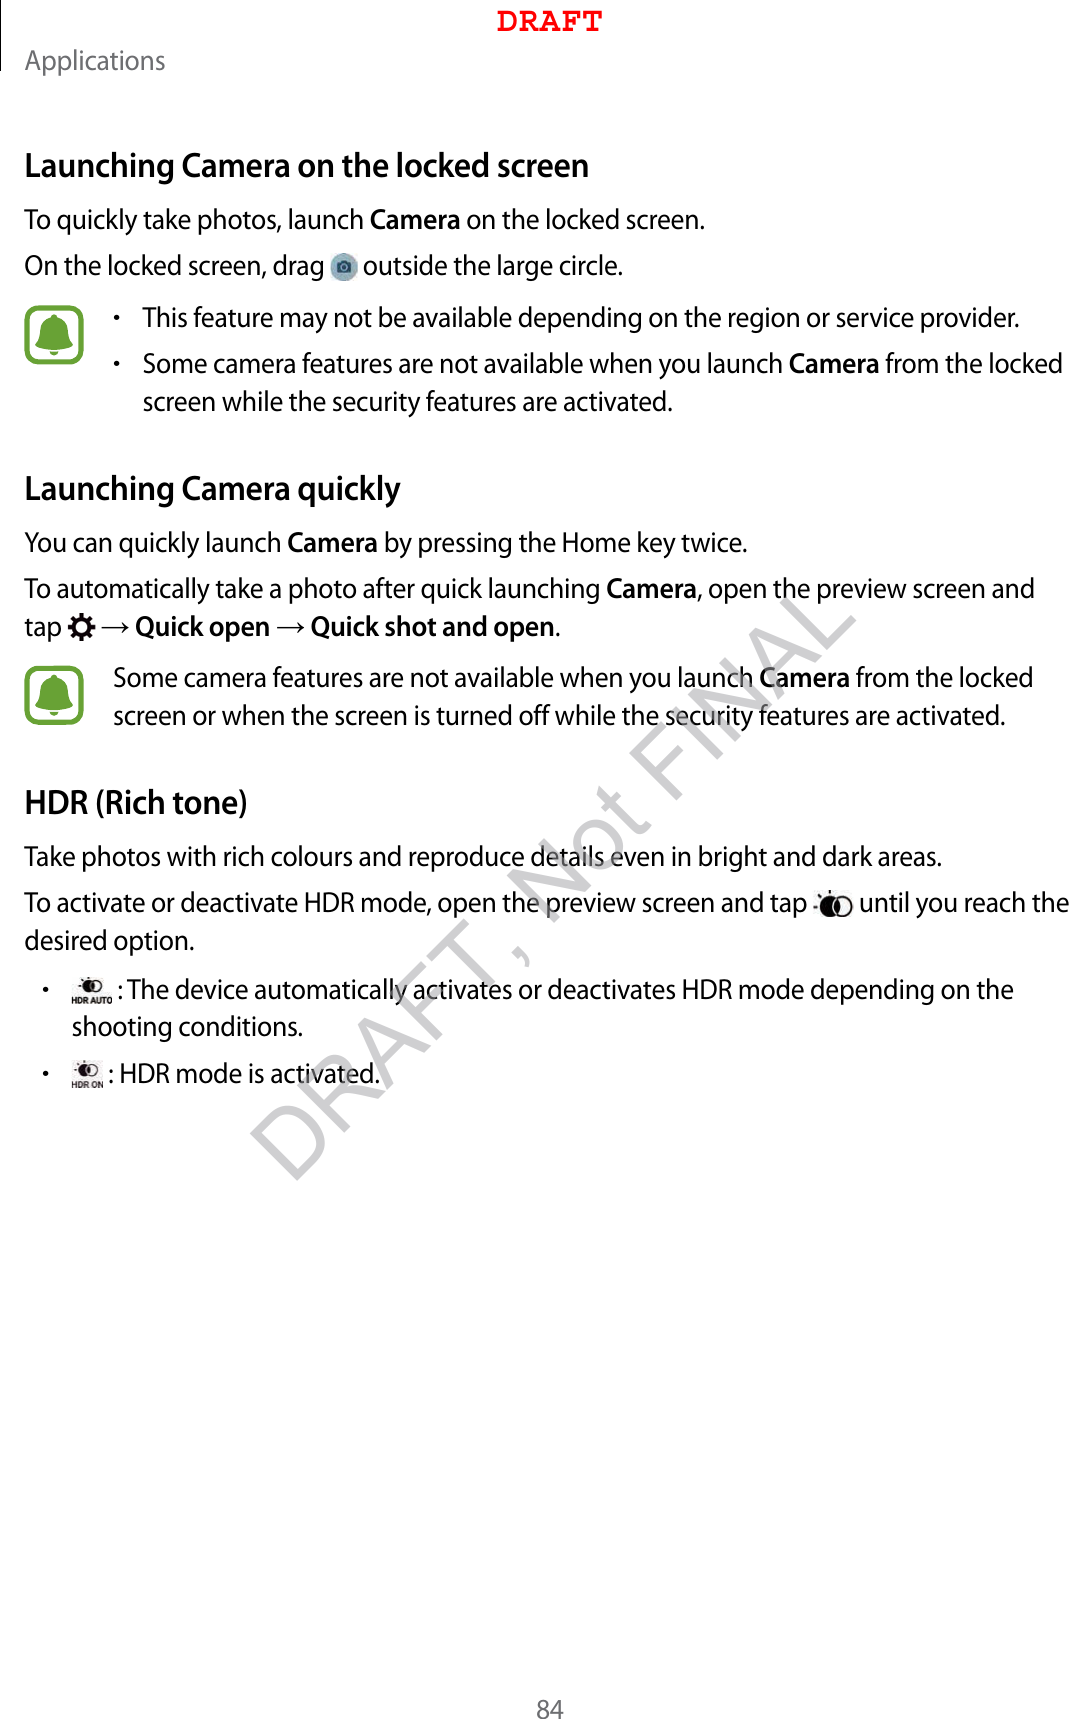 Applications84Launching Camera on the locked screenTo quickly take photos, launch Camera on the locked screen.On the locked screen, drag   outside the large circle.•This feature may not be available depending on the region or service provider.•Some camera features are not available when you launch Camera from the locked screen while the security features are activated.Launching Camera quicklyYou can quickly launch Camera by pressing the Home key twice.To automatically take a photo after quick launching Camera, open the preview screen and tap    Quick open  Quick shot and open.Some camera features are not available when you launch Camera from the locked screen or when the screen is turned off while the security features are activated.HDR (Rich tone)Take photos with rich colours and reproduce details even in bright and dark areas.To activate or deactivate HDR mode, open the preview screen and tap   until you reach the desired option.• : The device automatically activates or deactivates HDR mode depending on the shooting conditions.• : HDR mode is activated.DRAFTDRAFT, Not FINAL